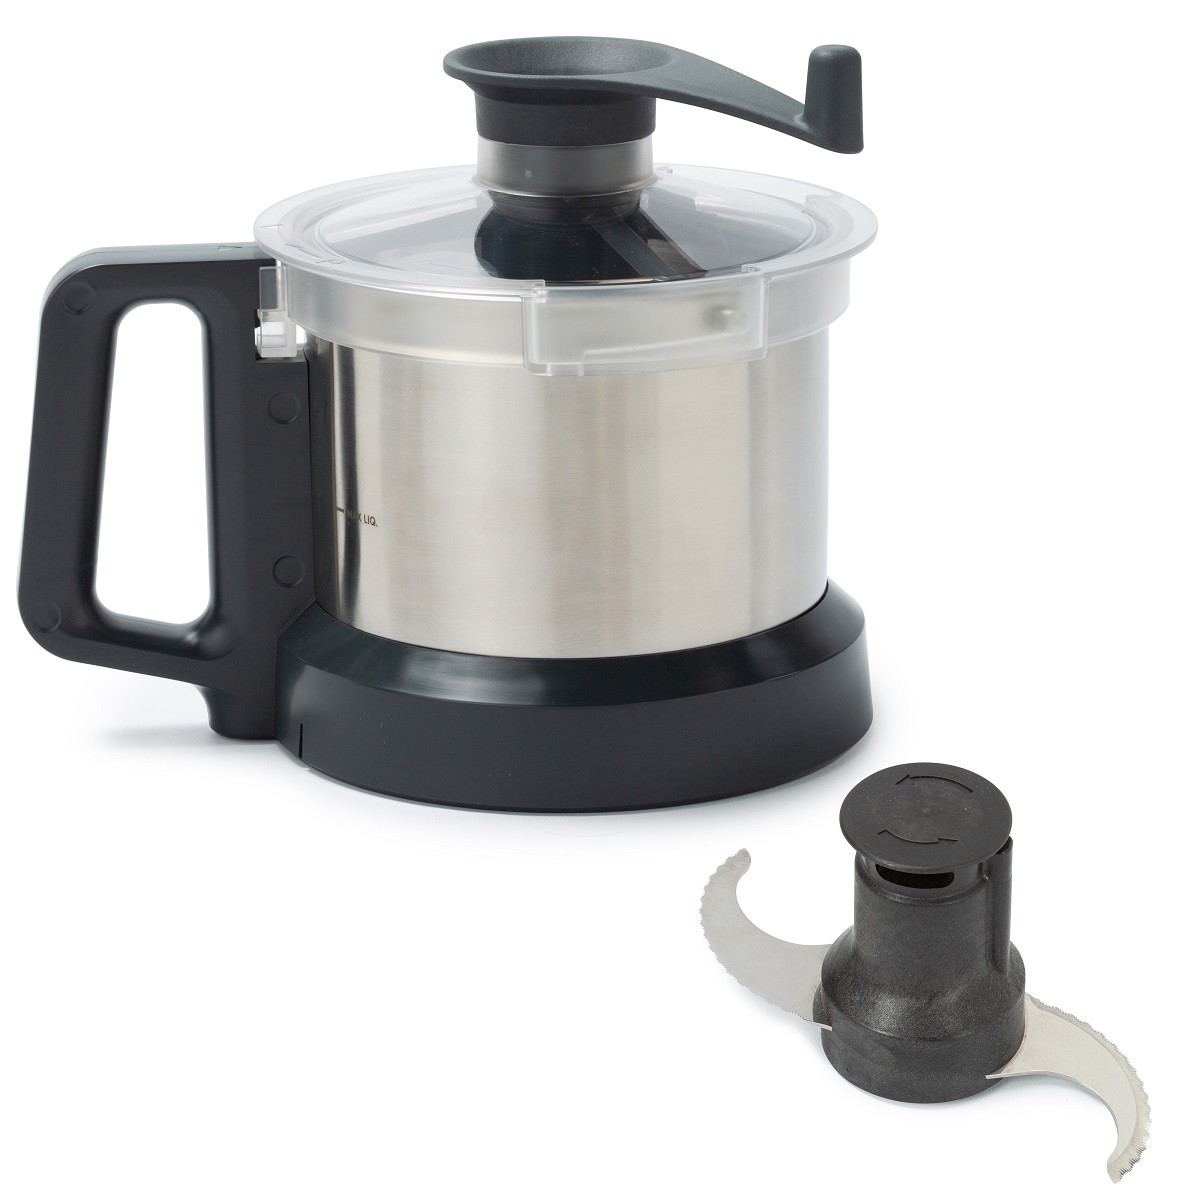 Electrolux stainless Steel Bowl for 2.6lt Cutter Mixer, Micro-toothed Rotor, Lid with Scraper 